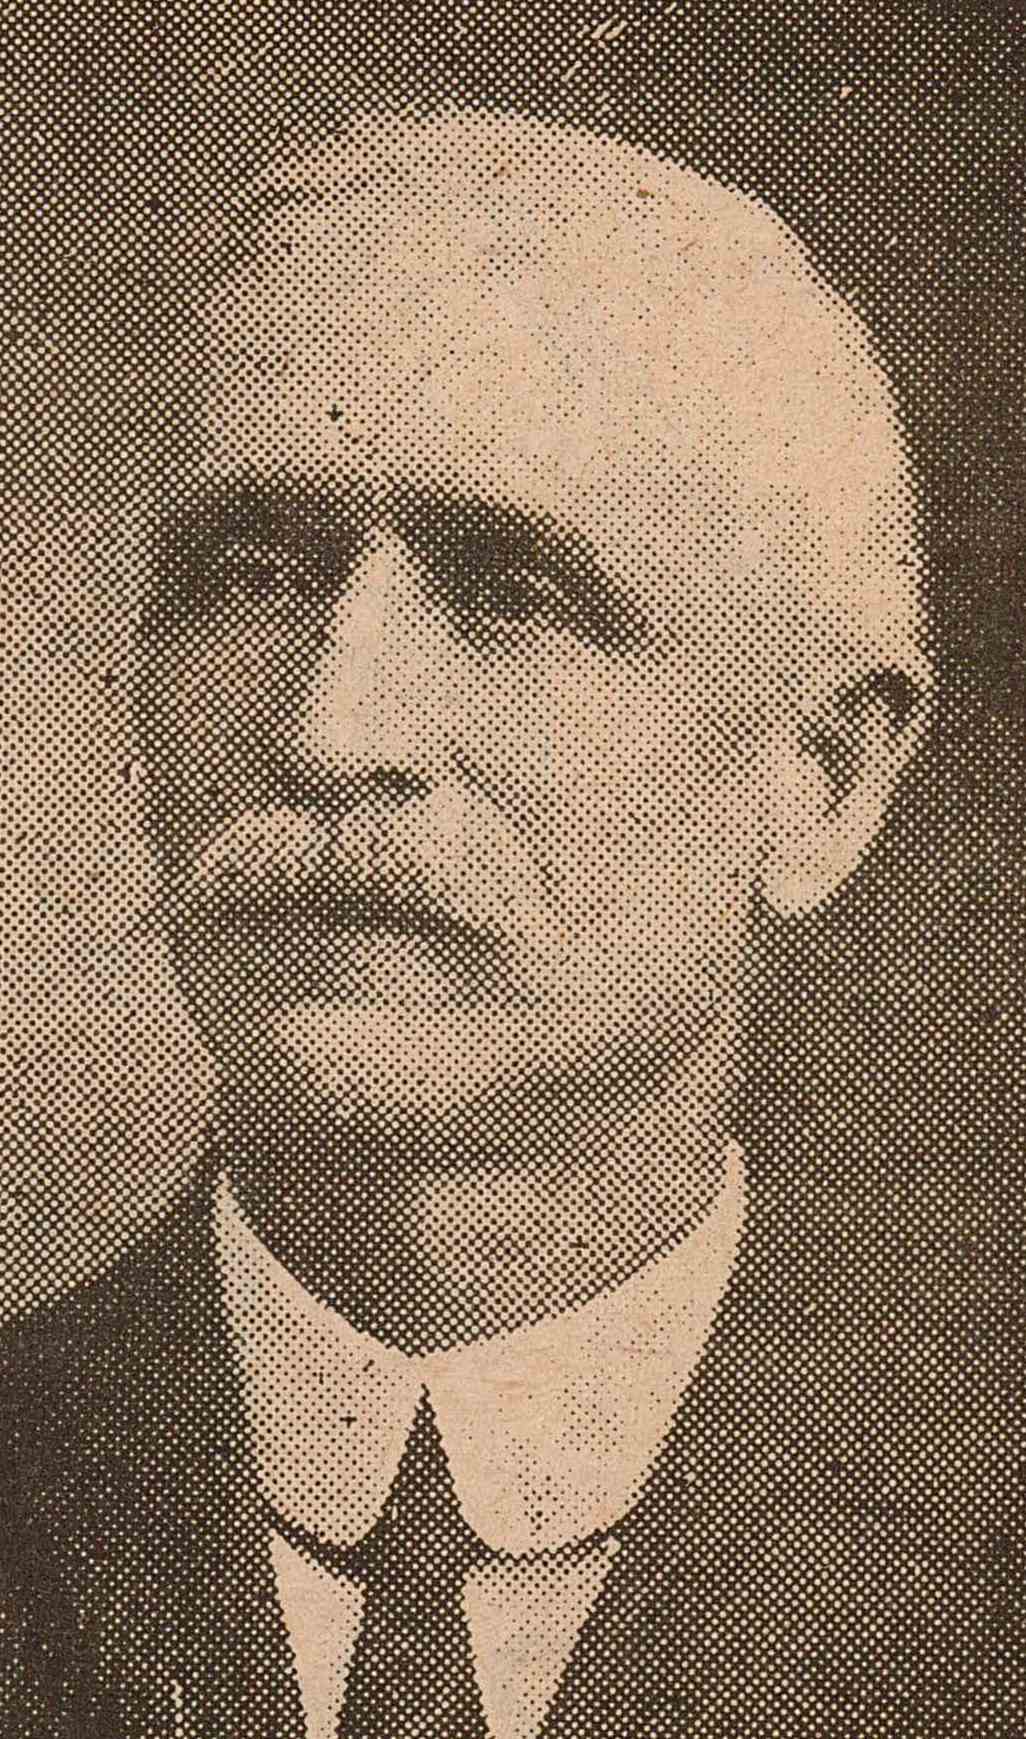 Portrait of William McGuire. McGuire has a mustache and his wearing a suit.